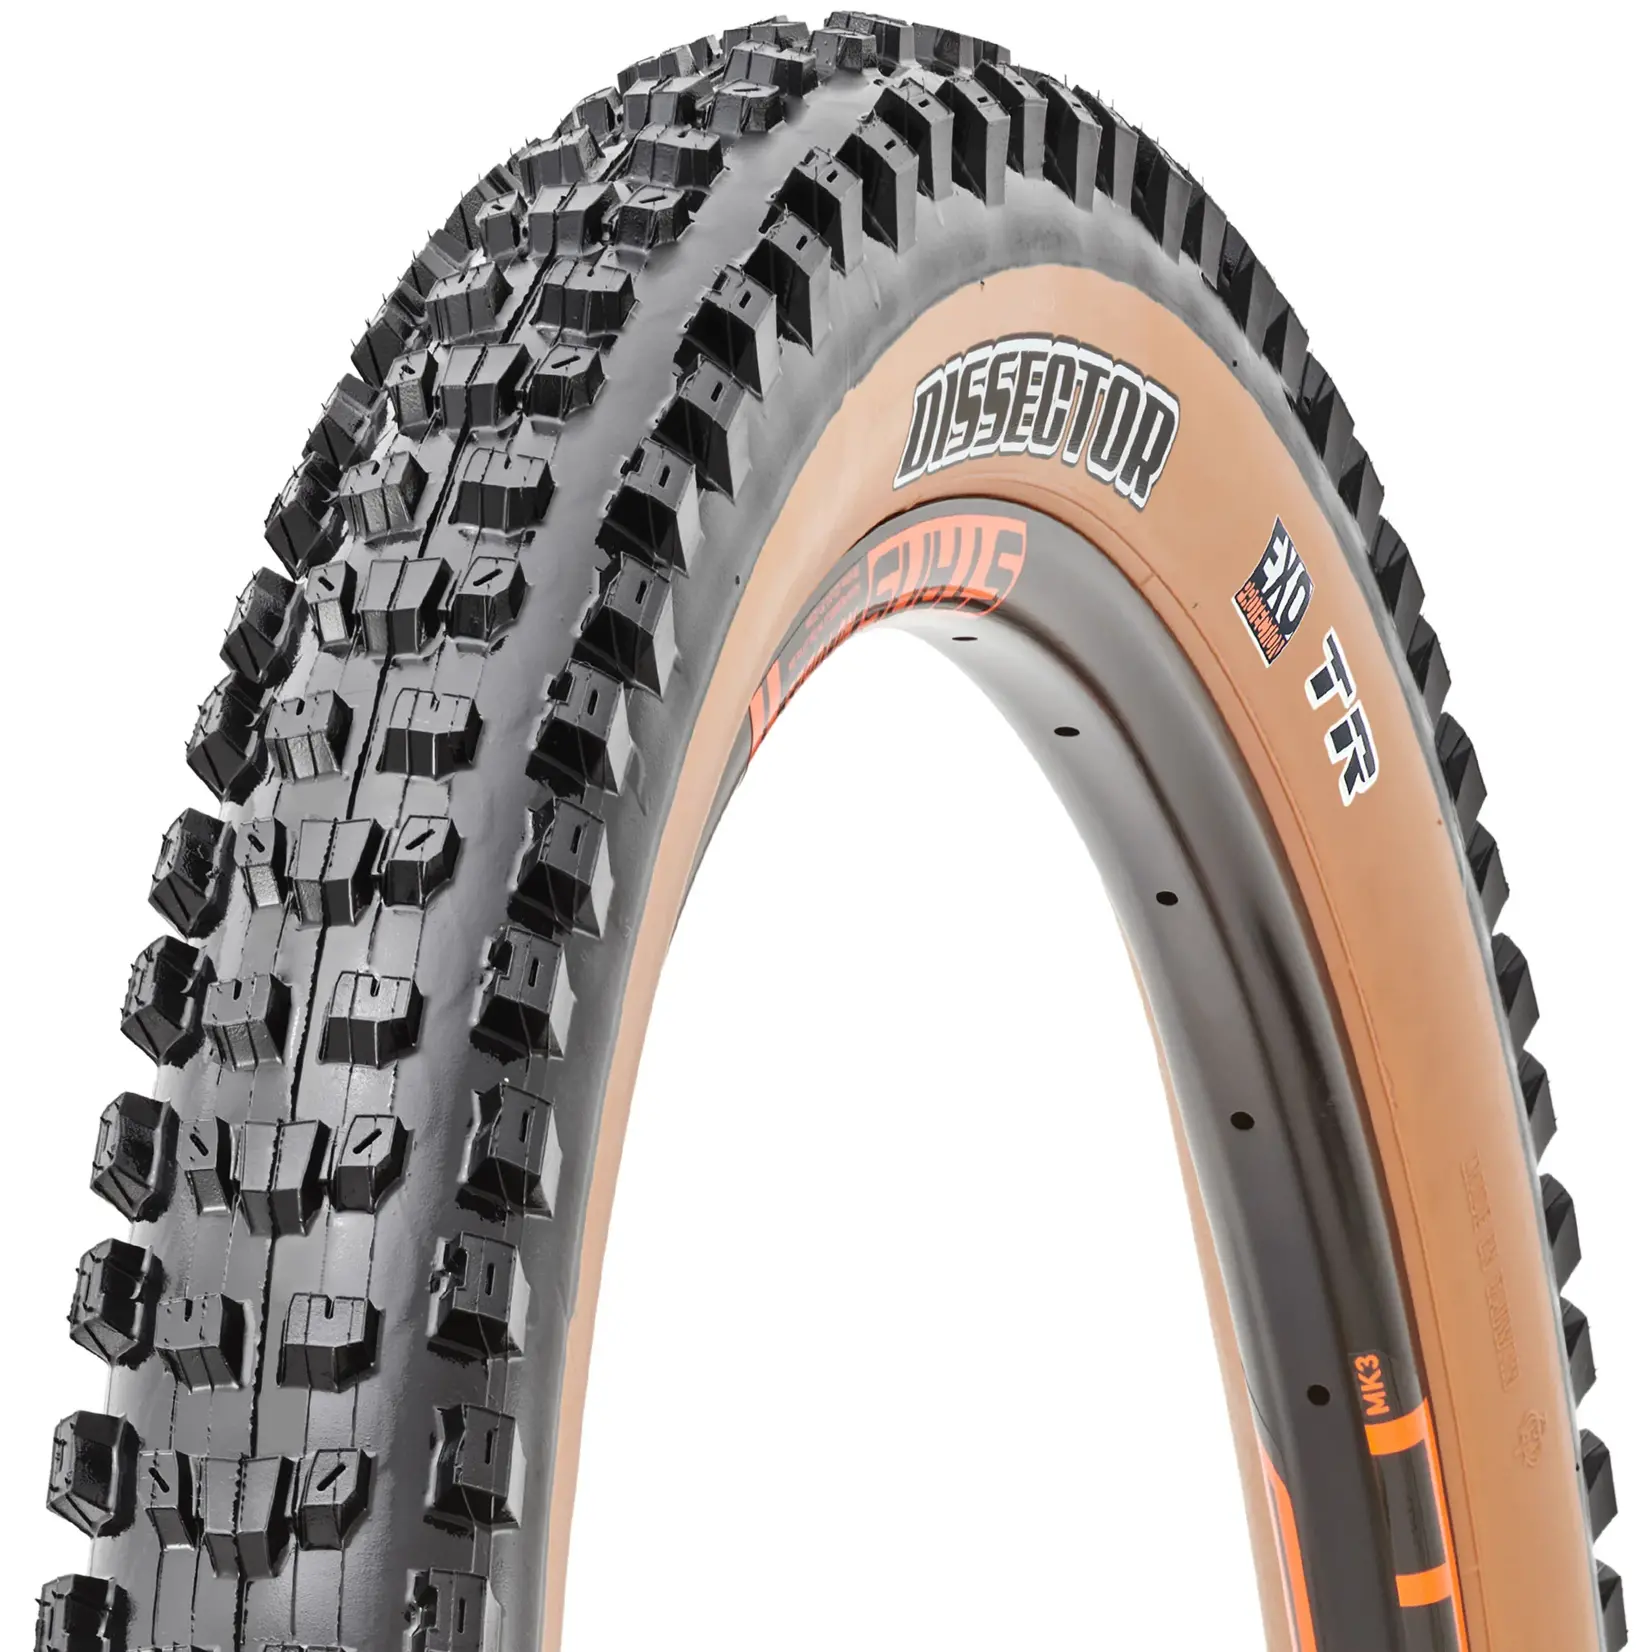 Maxxis Dissector Tire, 27.5''x2.40, Folding, Tubeless Ready, 3C Maxx Grip, Double Down, Wide Trail, 120TPI, Black